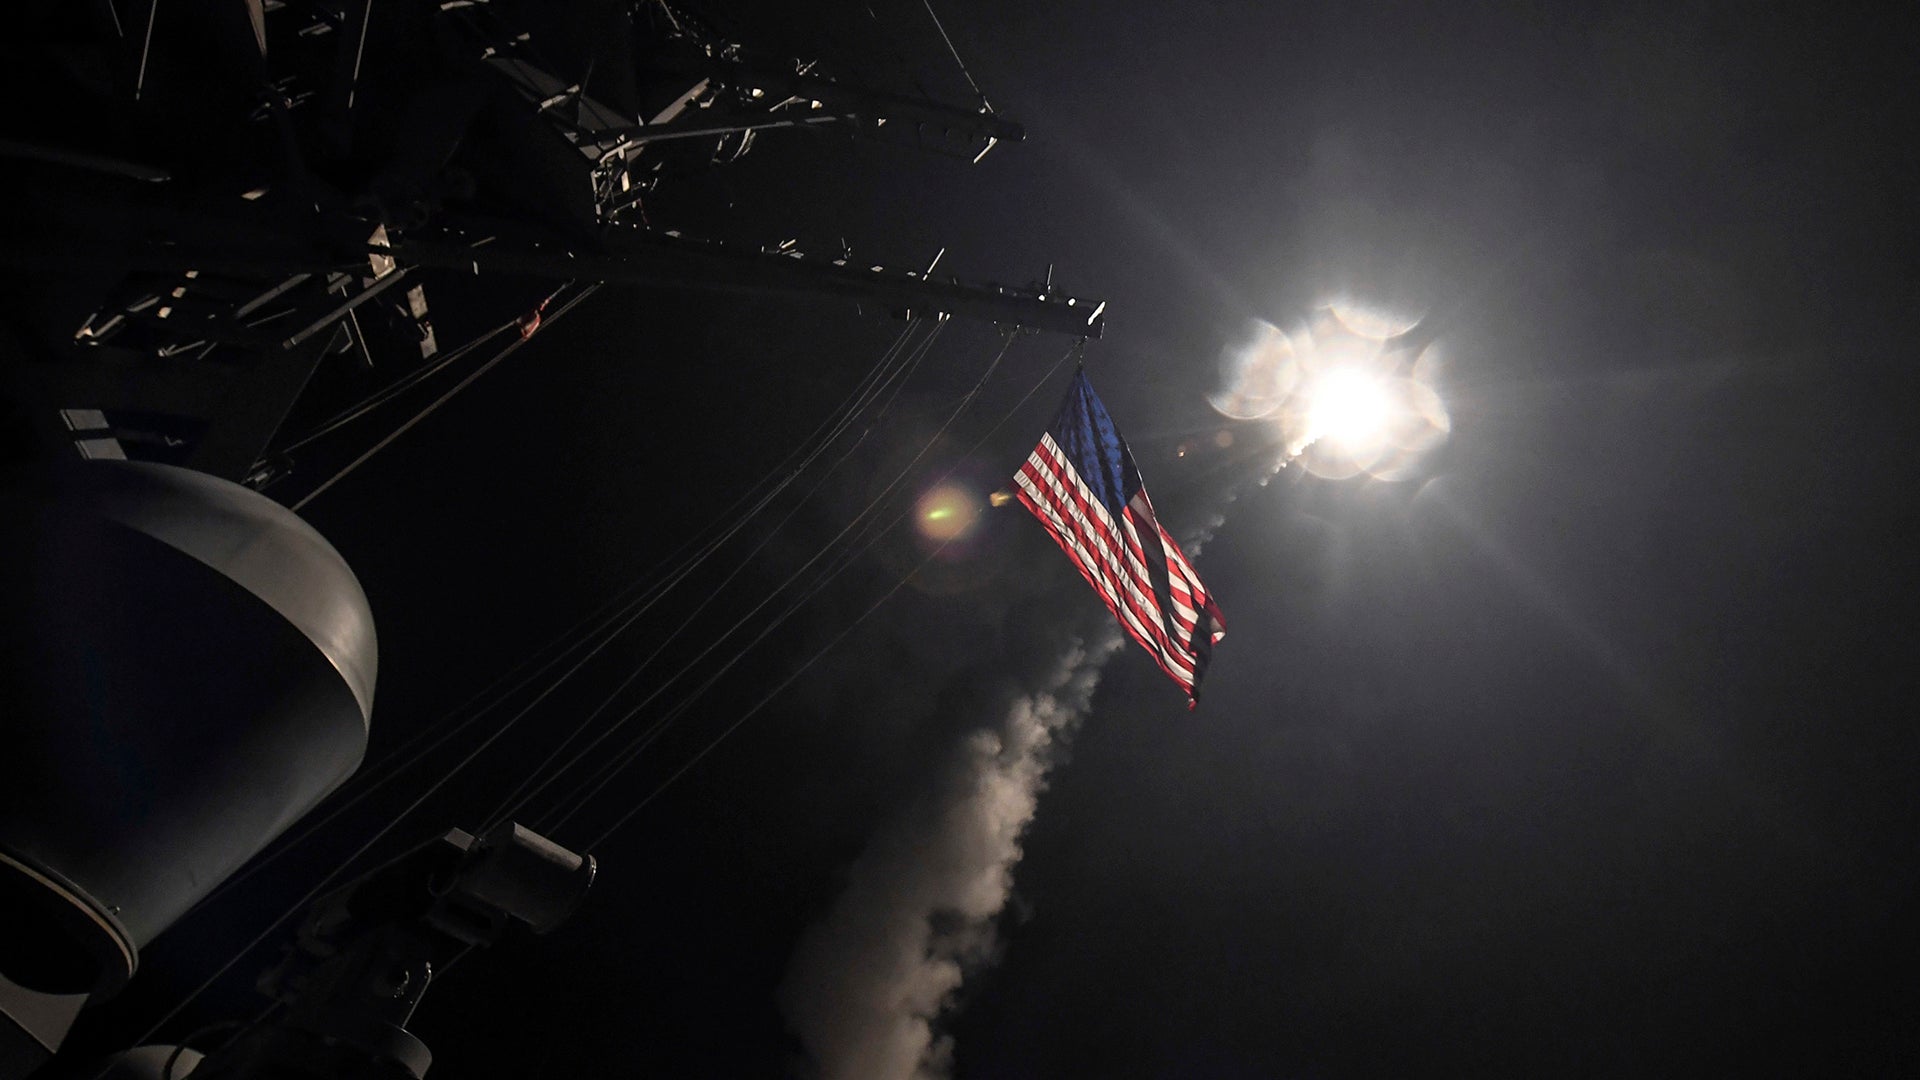 In this image provided by the U.S. Navy, the guided-missile destroyer USS Porter (DDG 78) launches a tomahawk land attack missile in the Mediterranean Sea, Friday, April 7, 2017. The United States blasted a Syrian air base with a barrage of cruise missiles in fiery retaliation for this week's gruesome chemical weapons attack against civilians.  (Mass Communication Specialist 3rd Class Ford Williams/U.S. Navy via AP)